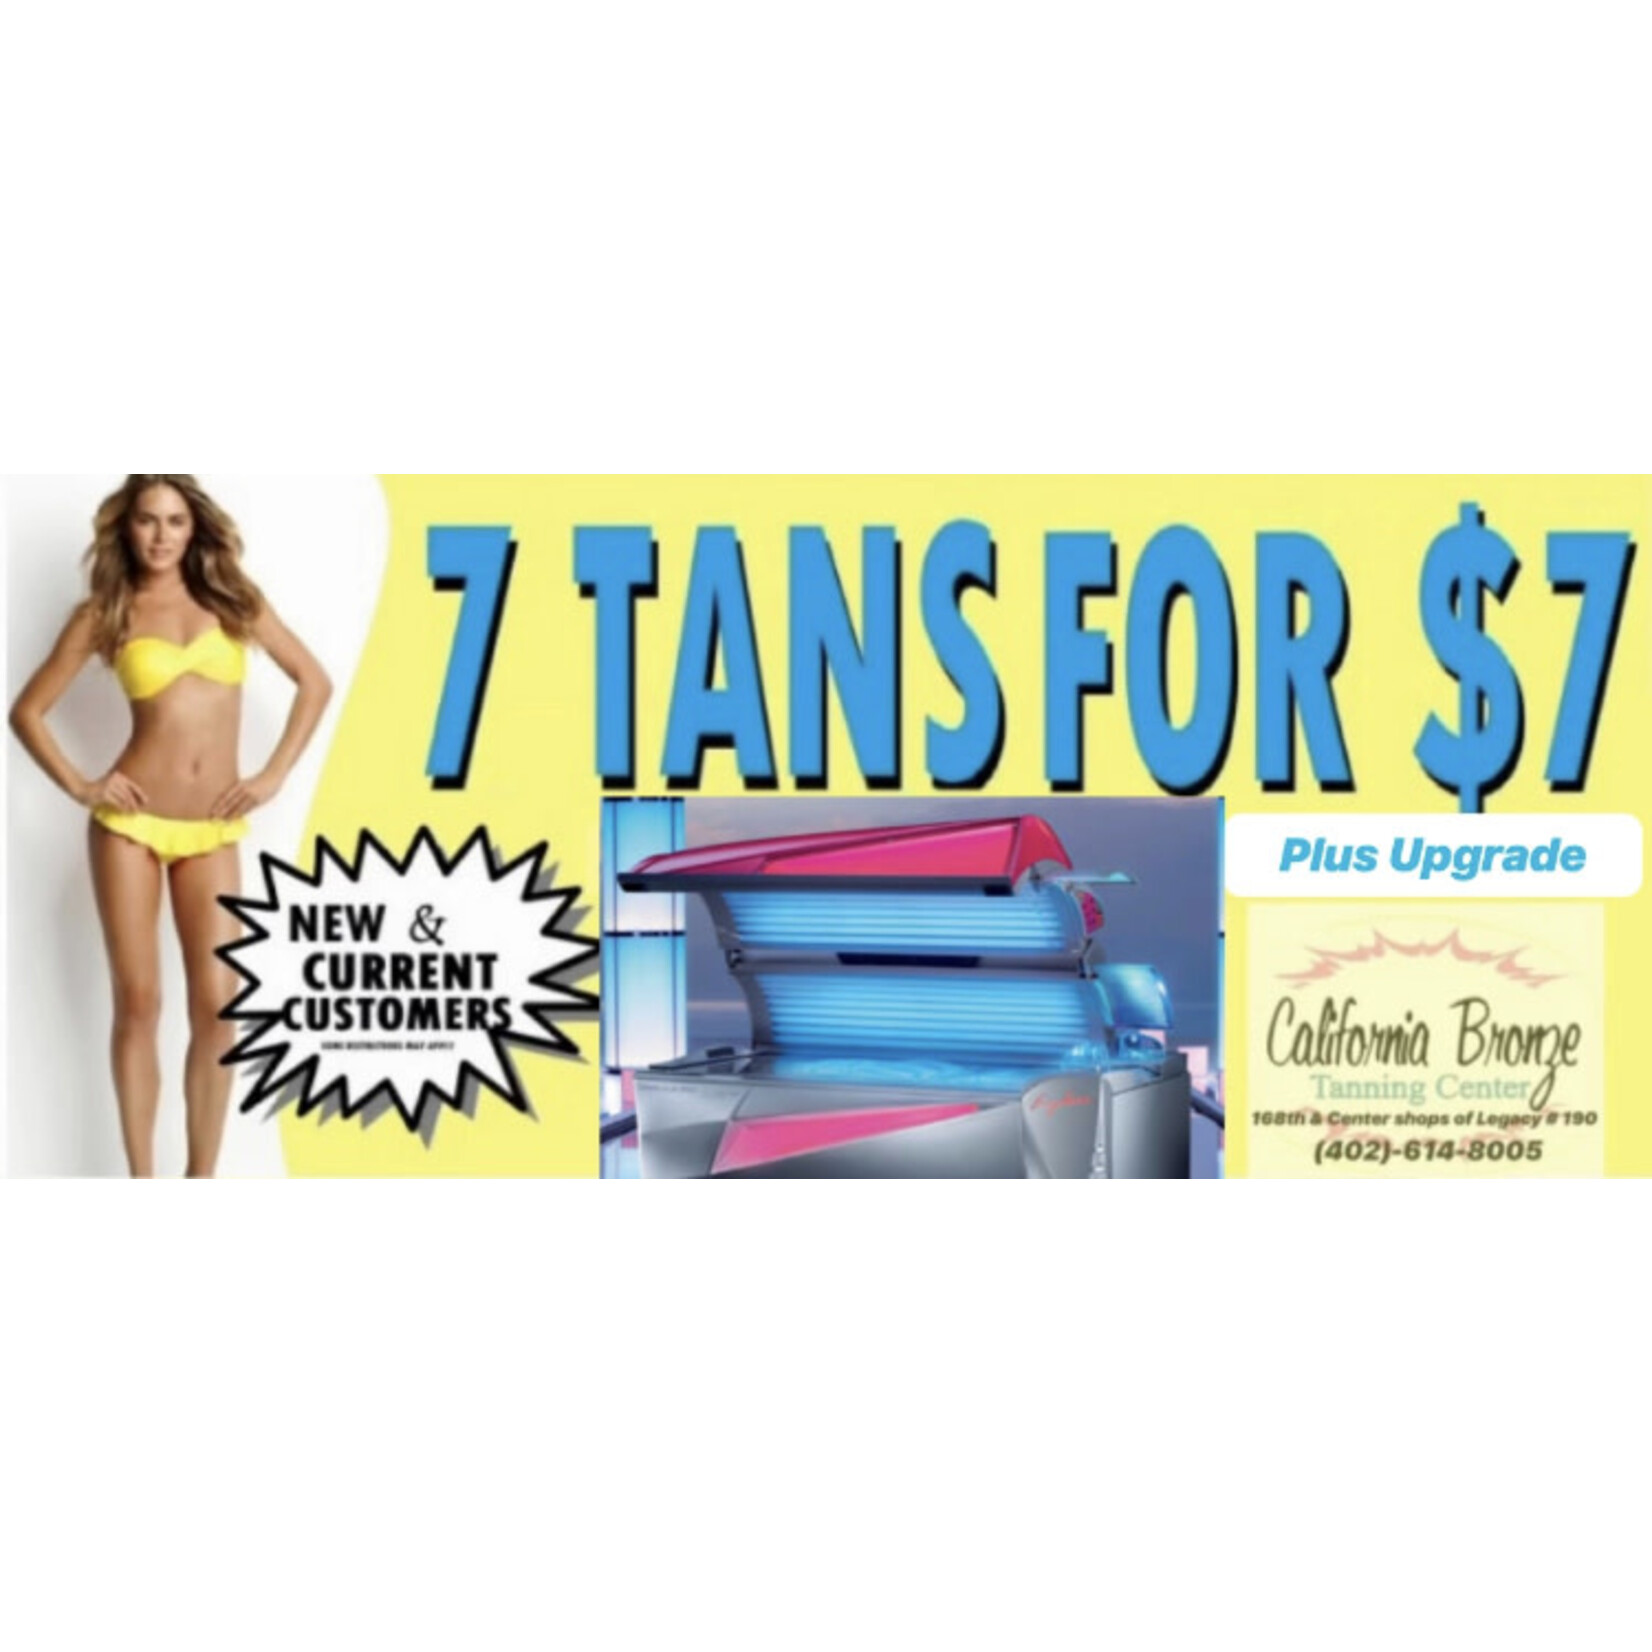 CALIFORNIA BRONZE 7 TAN SUPER UPGRADE TAN CARD.  (3 TANS IN BASIC AND 4 SUPER UPGRADES EXTENDS THE 7 FOR $7 SPECIAL TO 14 DAYS)